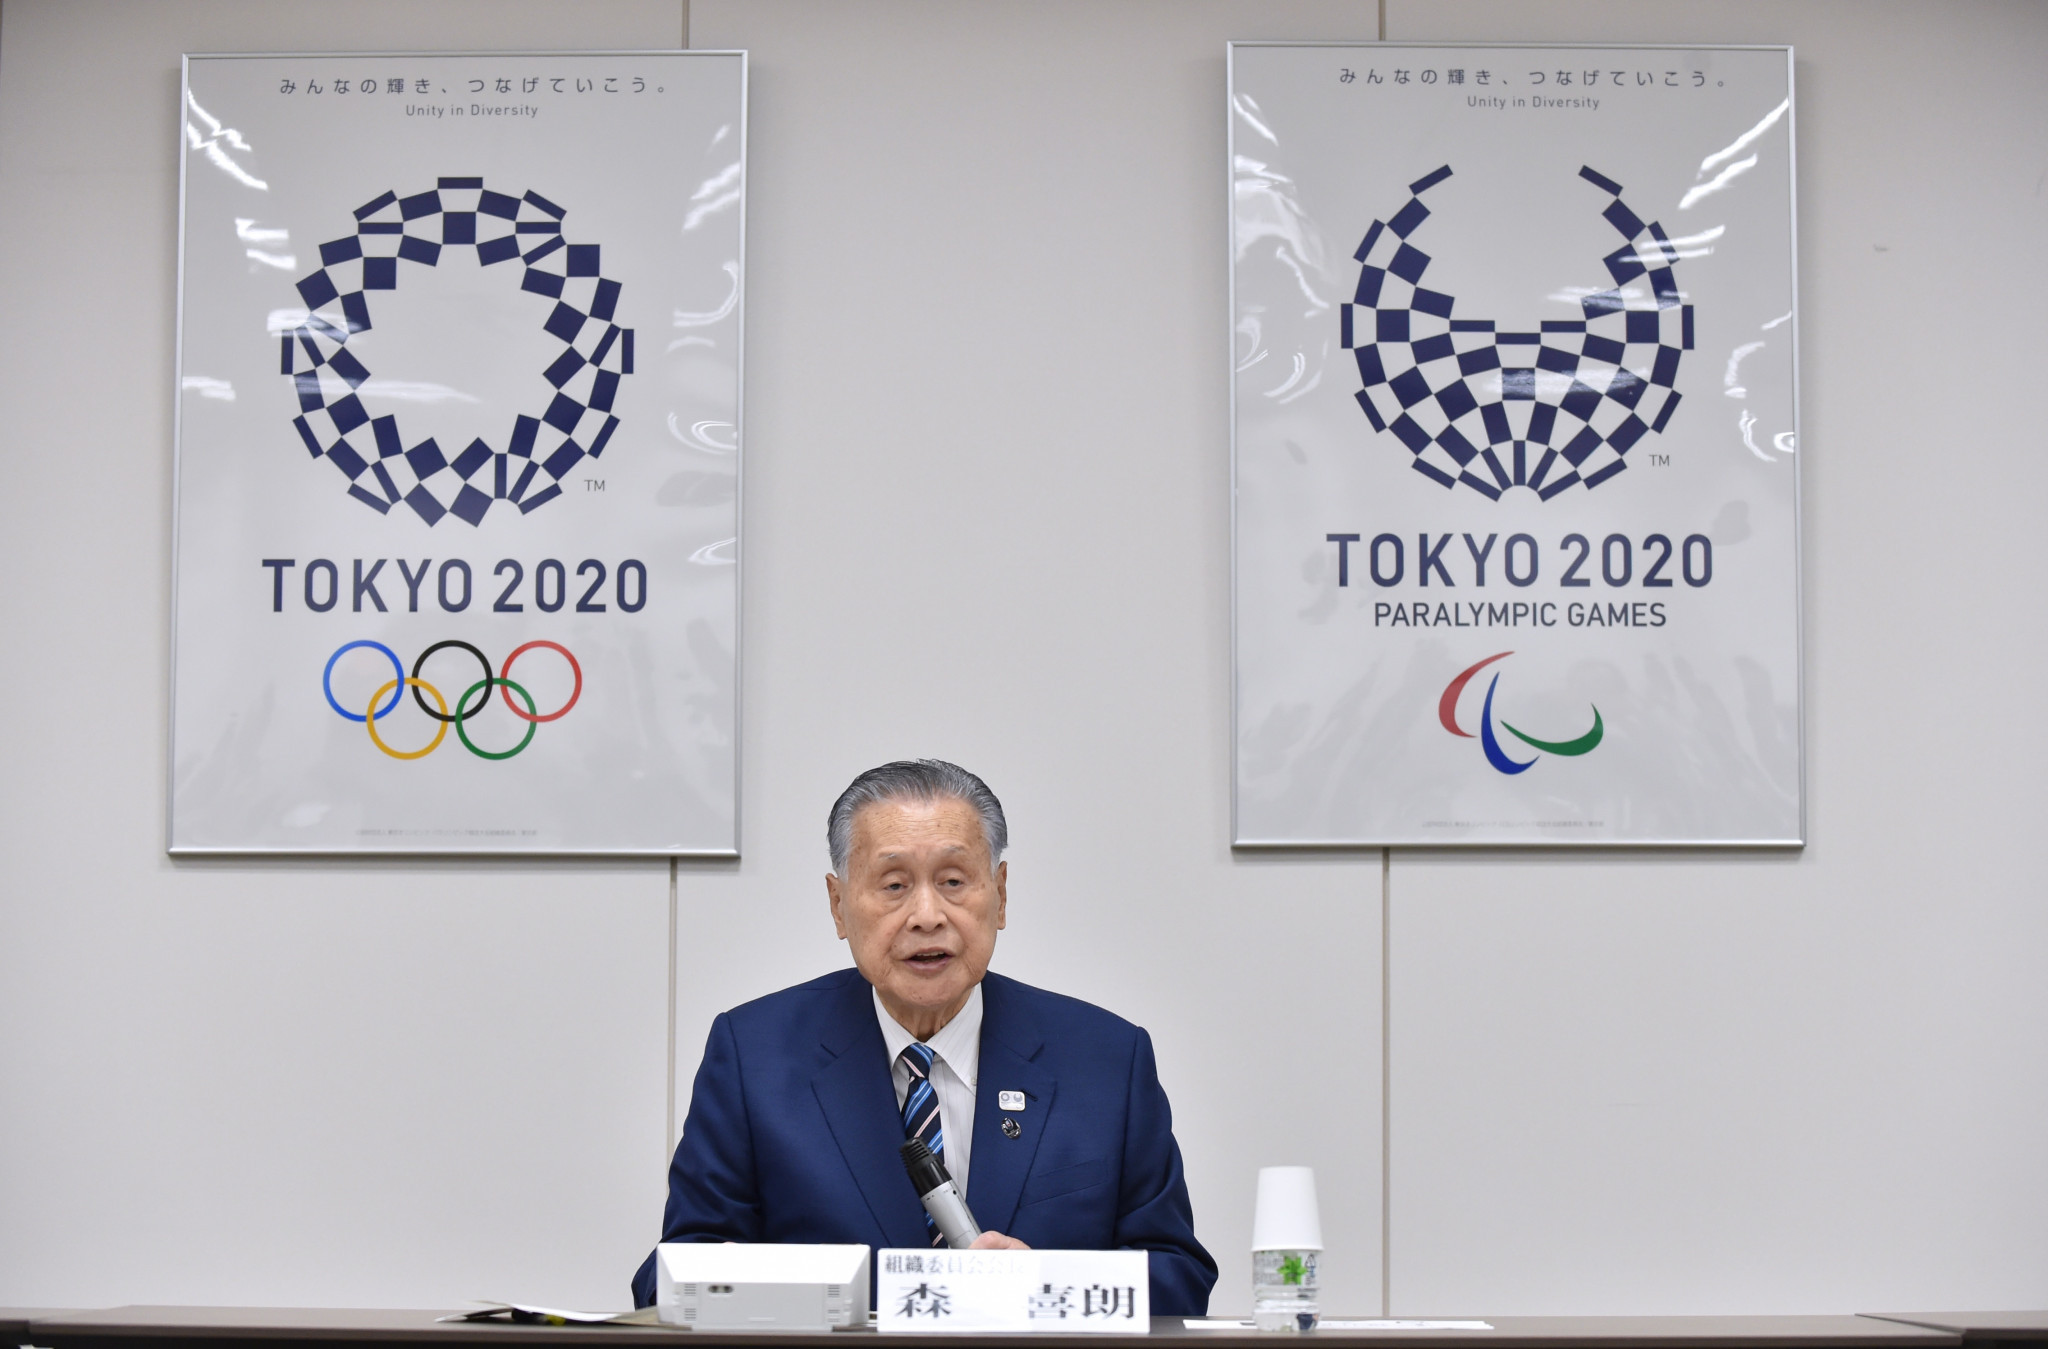 Schedule announced for Tokyo 2020 Olympic Torch Relay